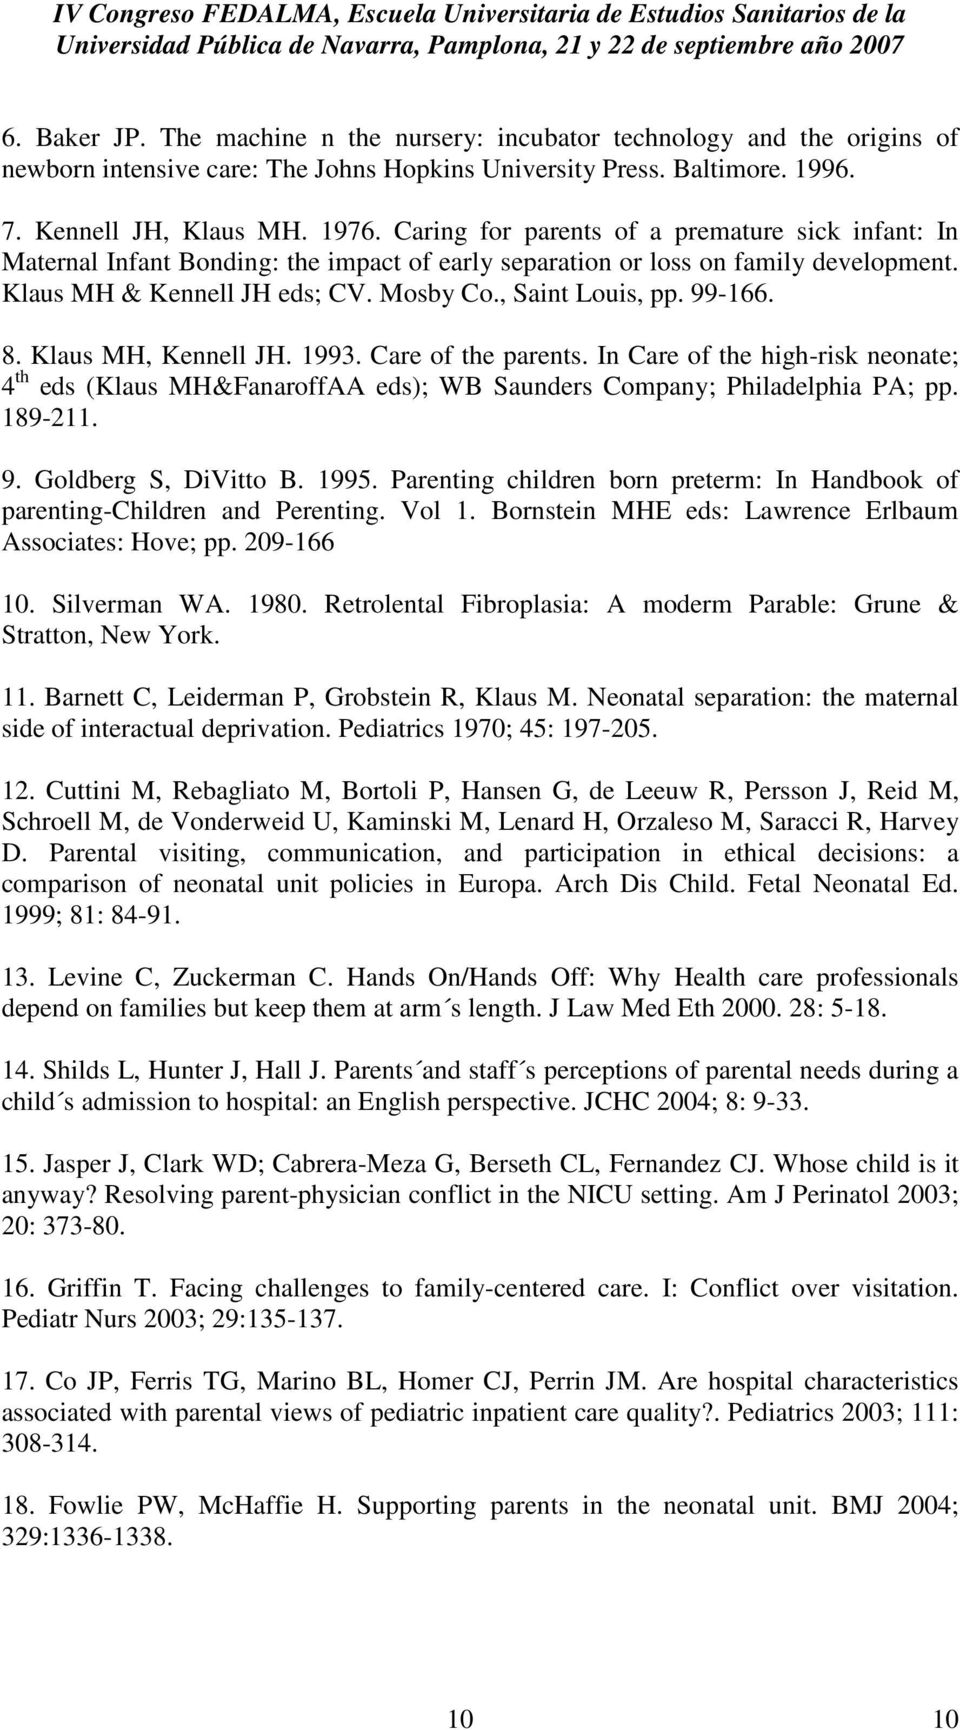 99-166. 8. Klaus MH, Kennell JH. 1993. Care of the parents. In Care of the high-risk neonate; 4 th eds (Klaus MH&FanaroffAA eds); WB Saunders Company; Philadelphia PA; pp. 189-211. 9.